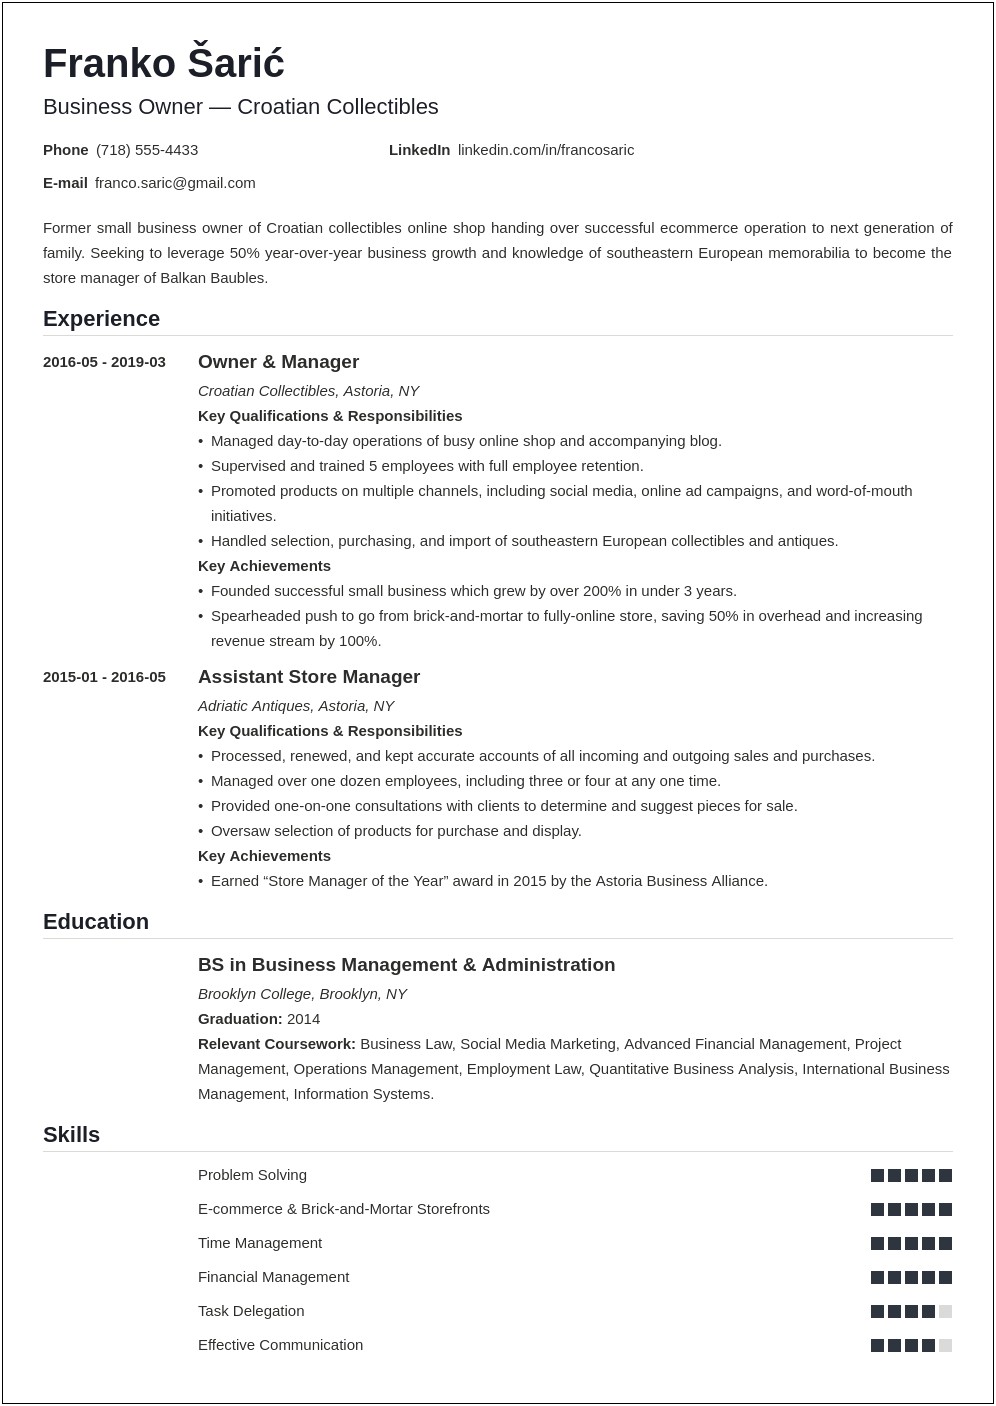 Skills To Put On Resume For Business